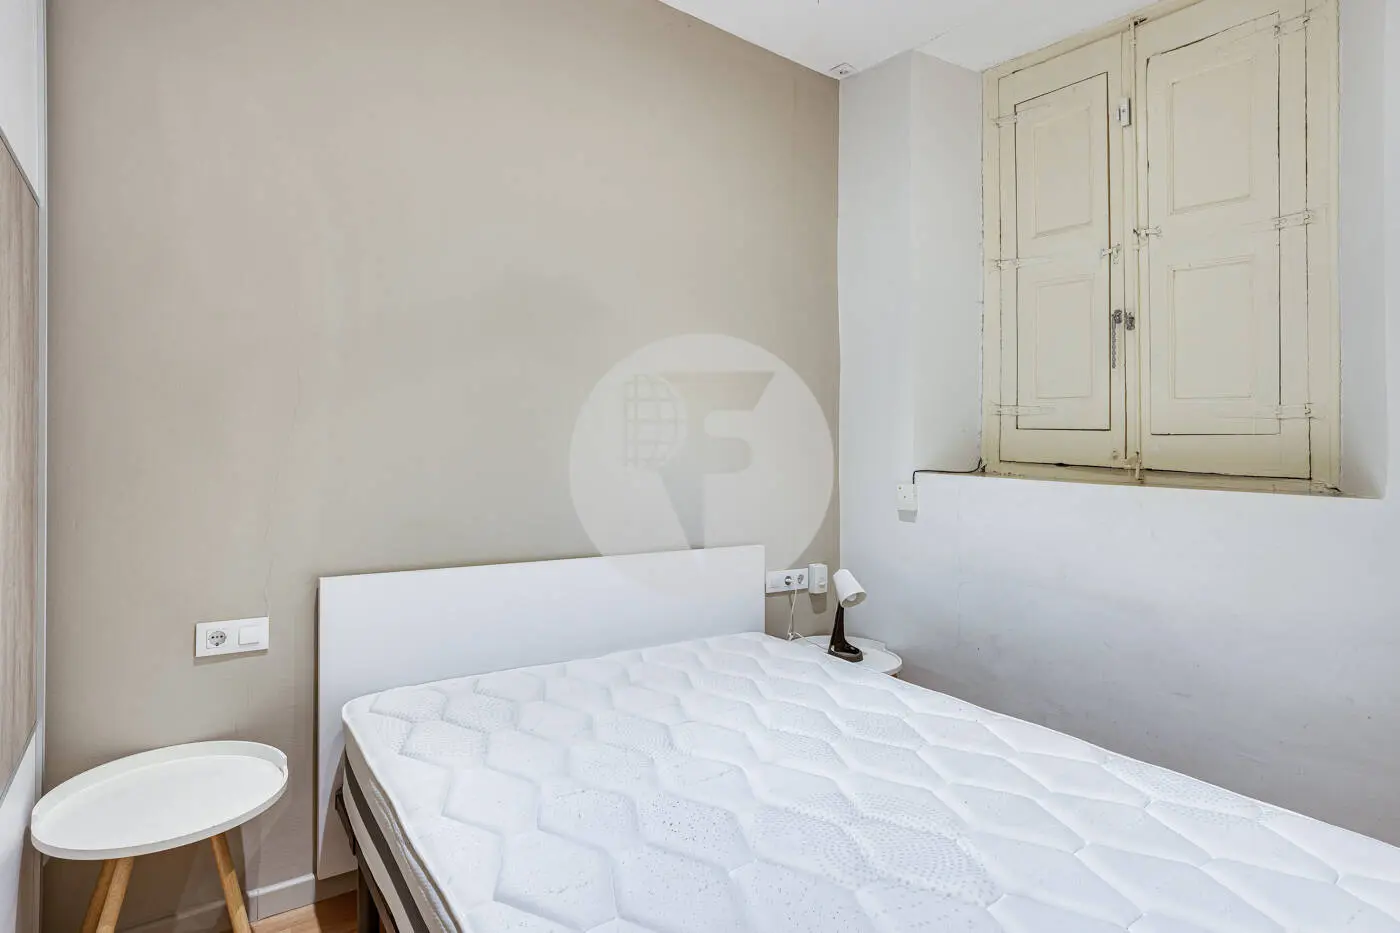 Magnificent apartment for sale next to Pl Universitat of 114m2 according to the land registry, located on Tallers Street in the Ciutat Vella neighborhood of Barcelona 18